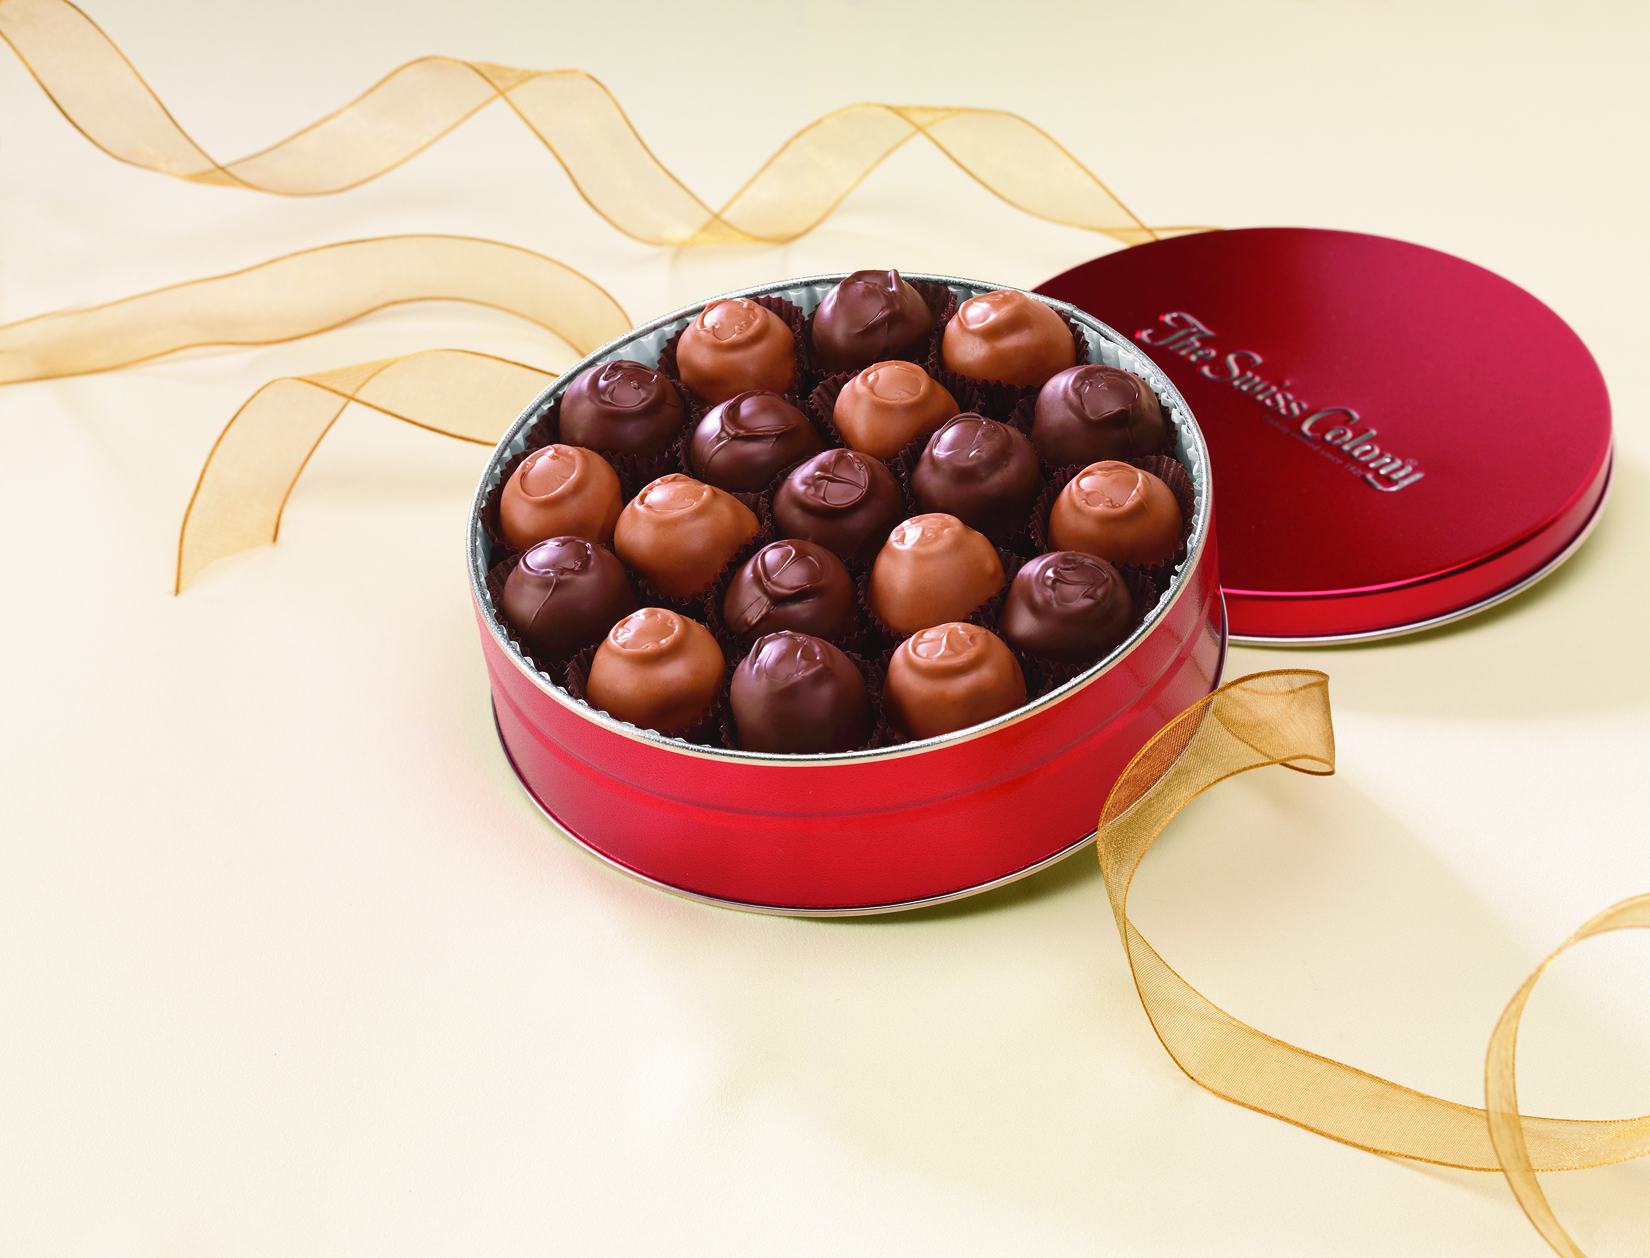 Give a gift of chocolate-covered cherries.